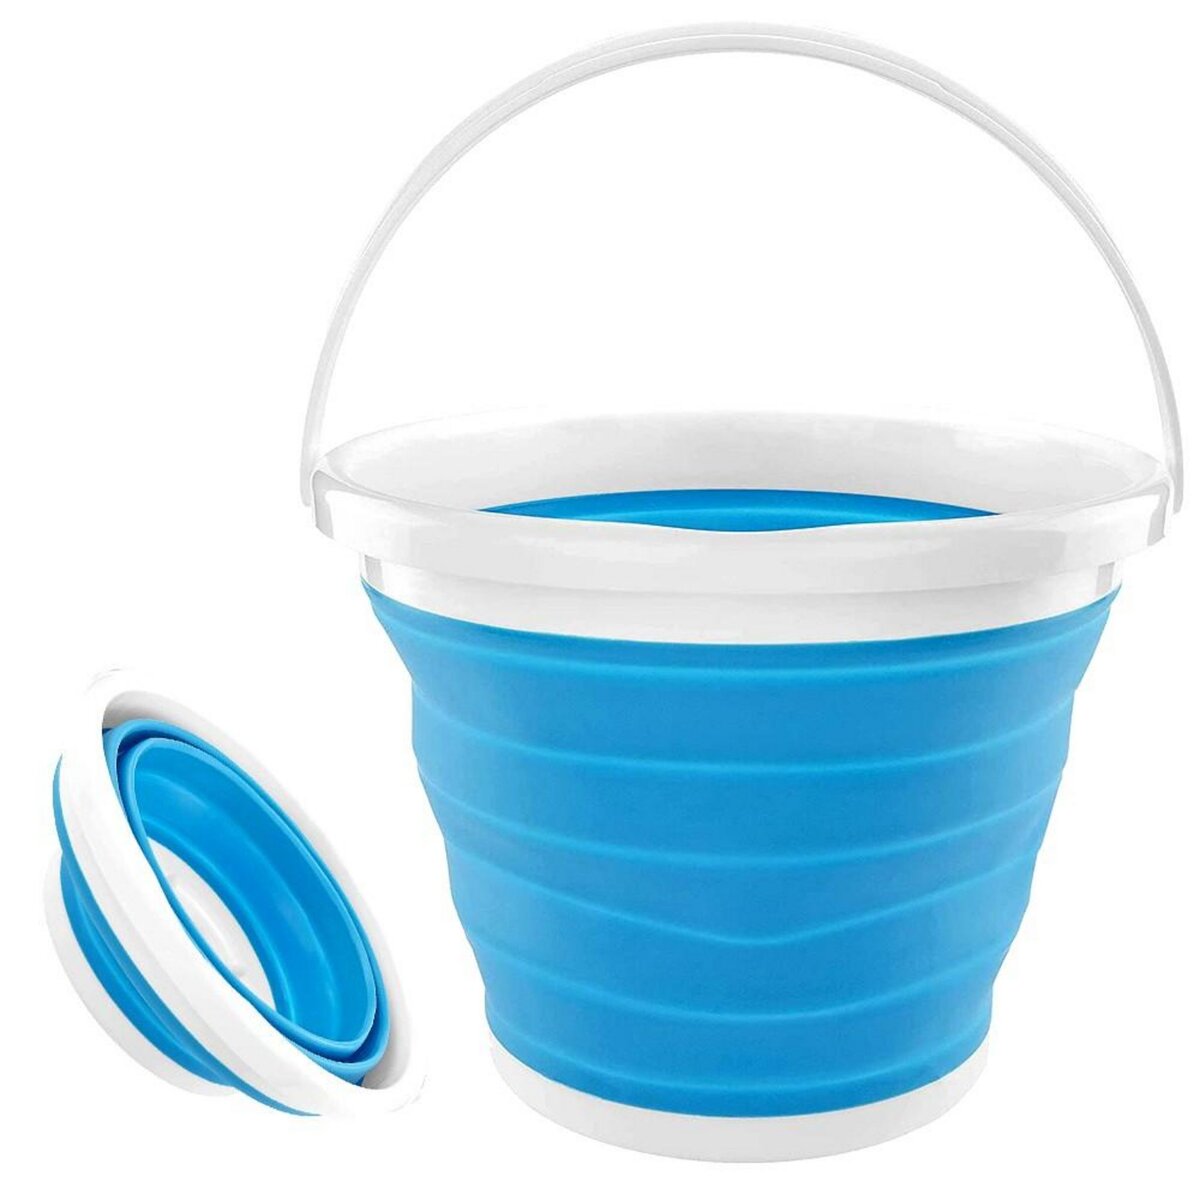 Egouttoir a vaisselle silicone pliable camping pop up